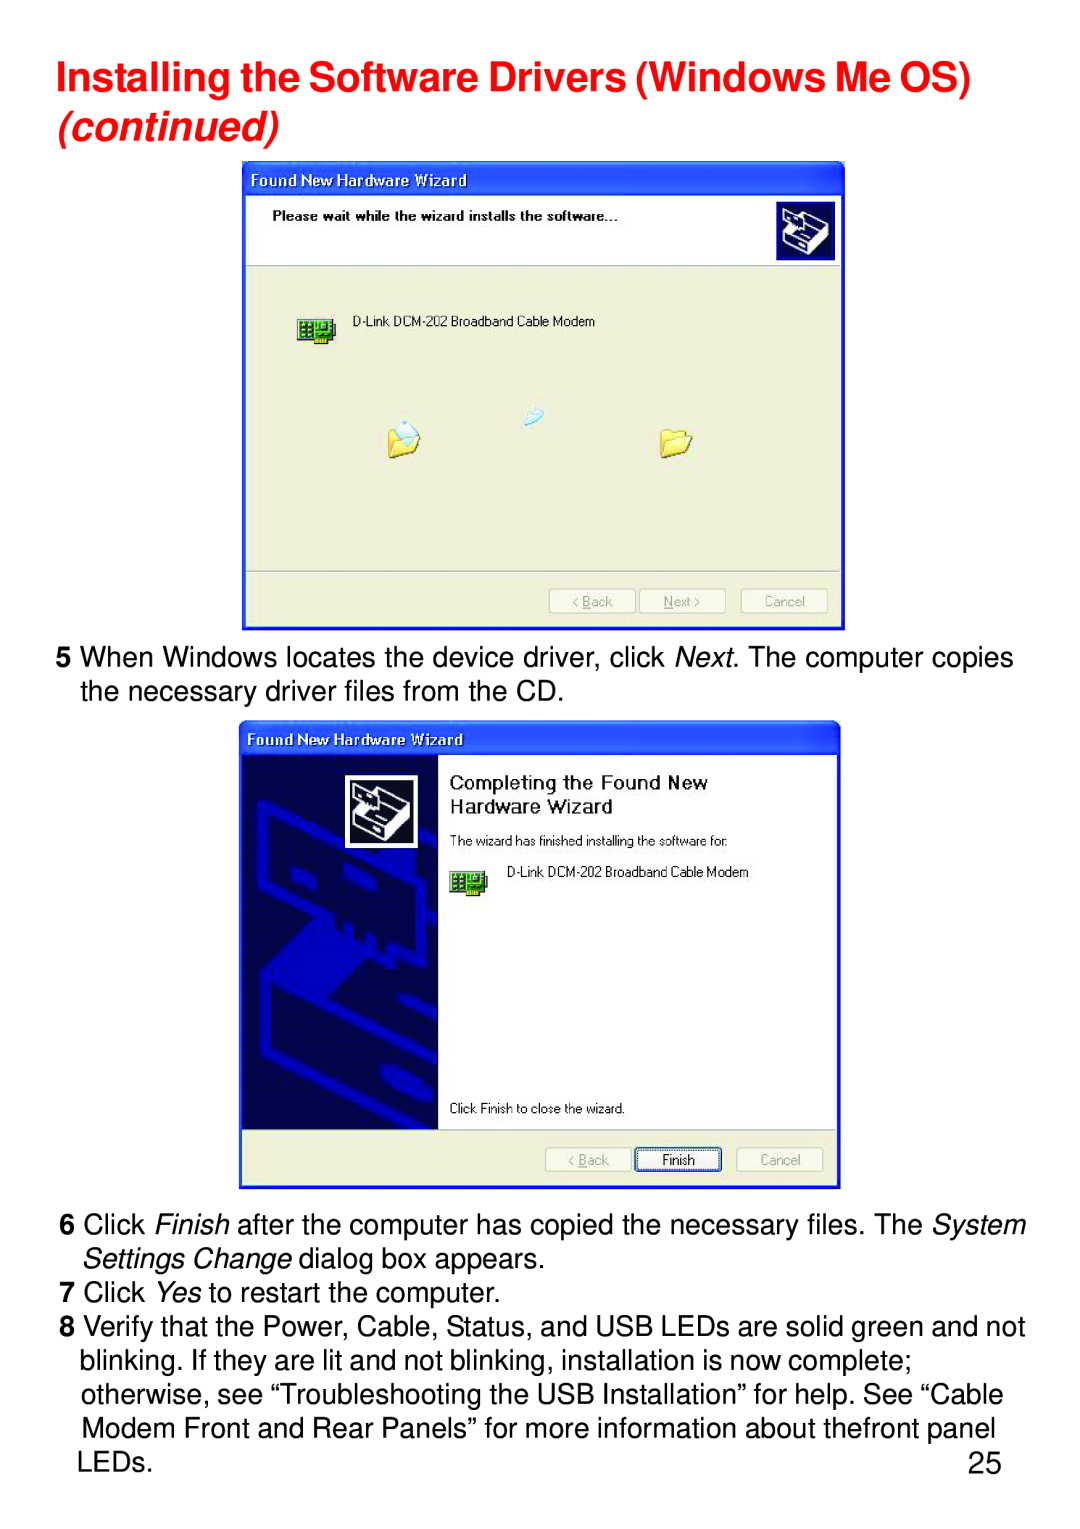 D-Link DCM-202 manual Installing the Software Drivers Windows Me OS continued 